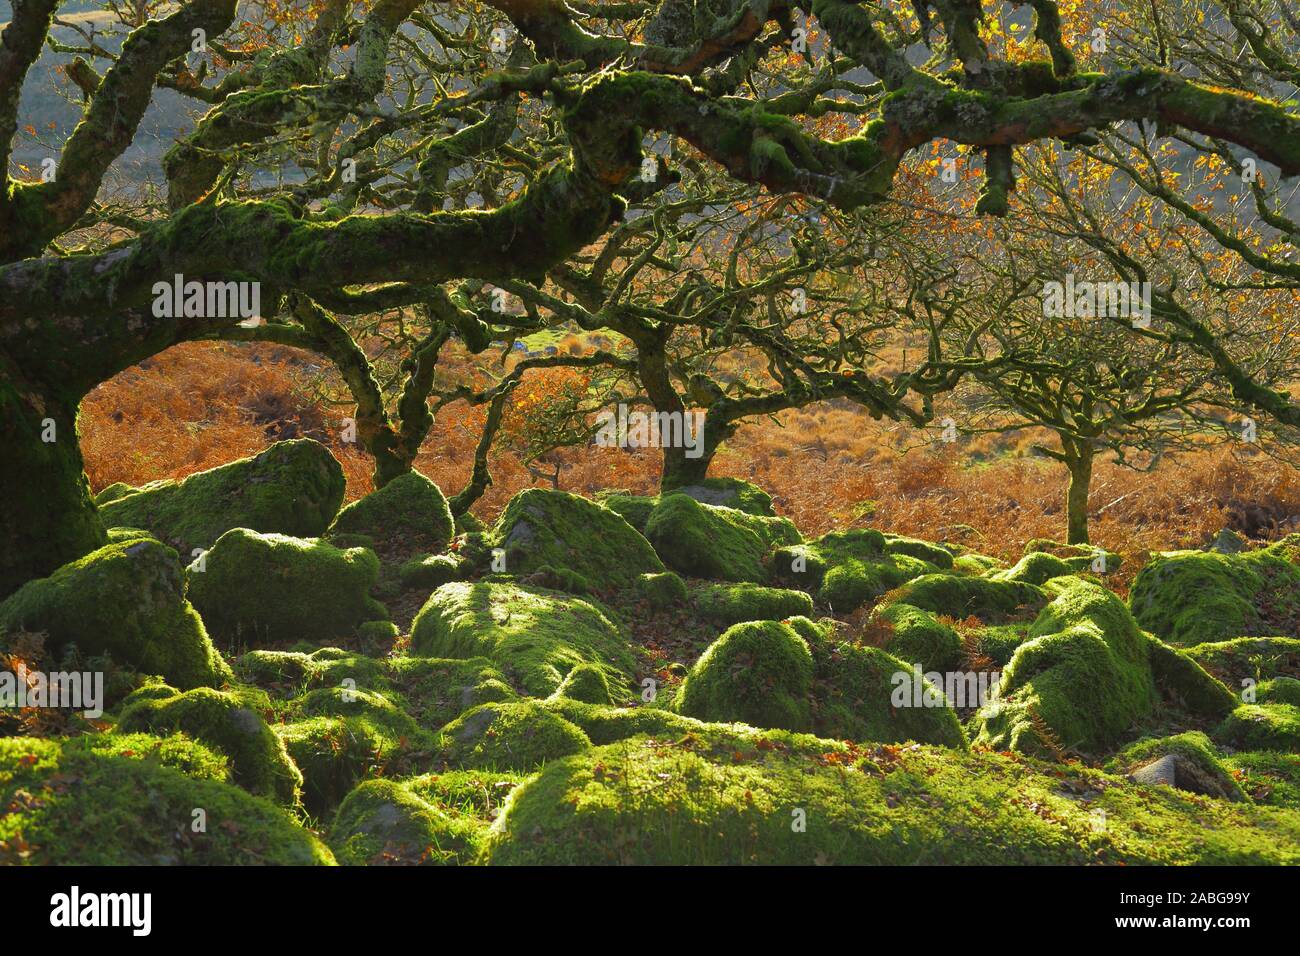 Ancient forest Wistman's Wood near Two Bridges in Dartmoor, Devon. Magical mysterious woodland with an eerie feel. Hundreds of years old oak trees Stock Photo